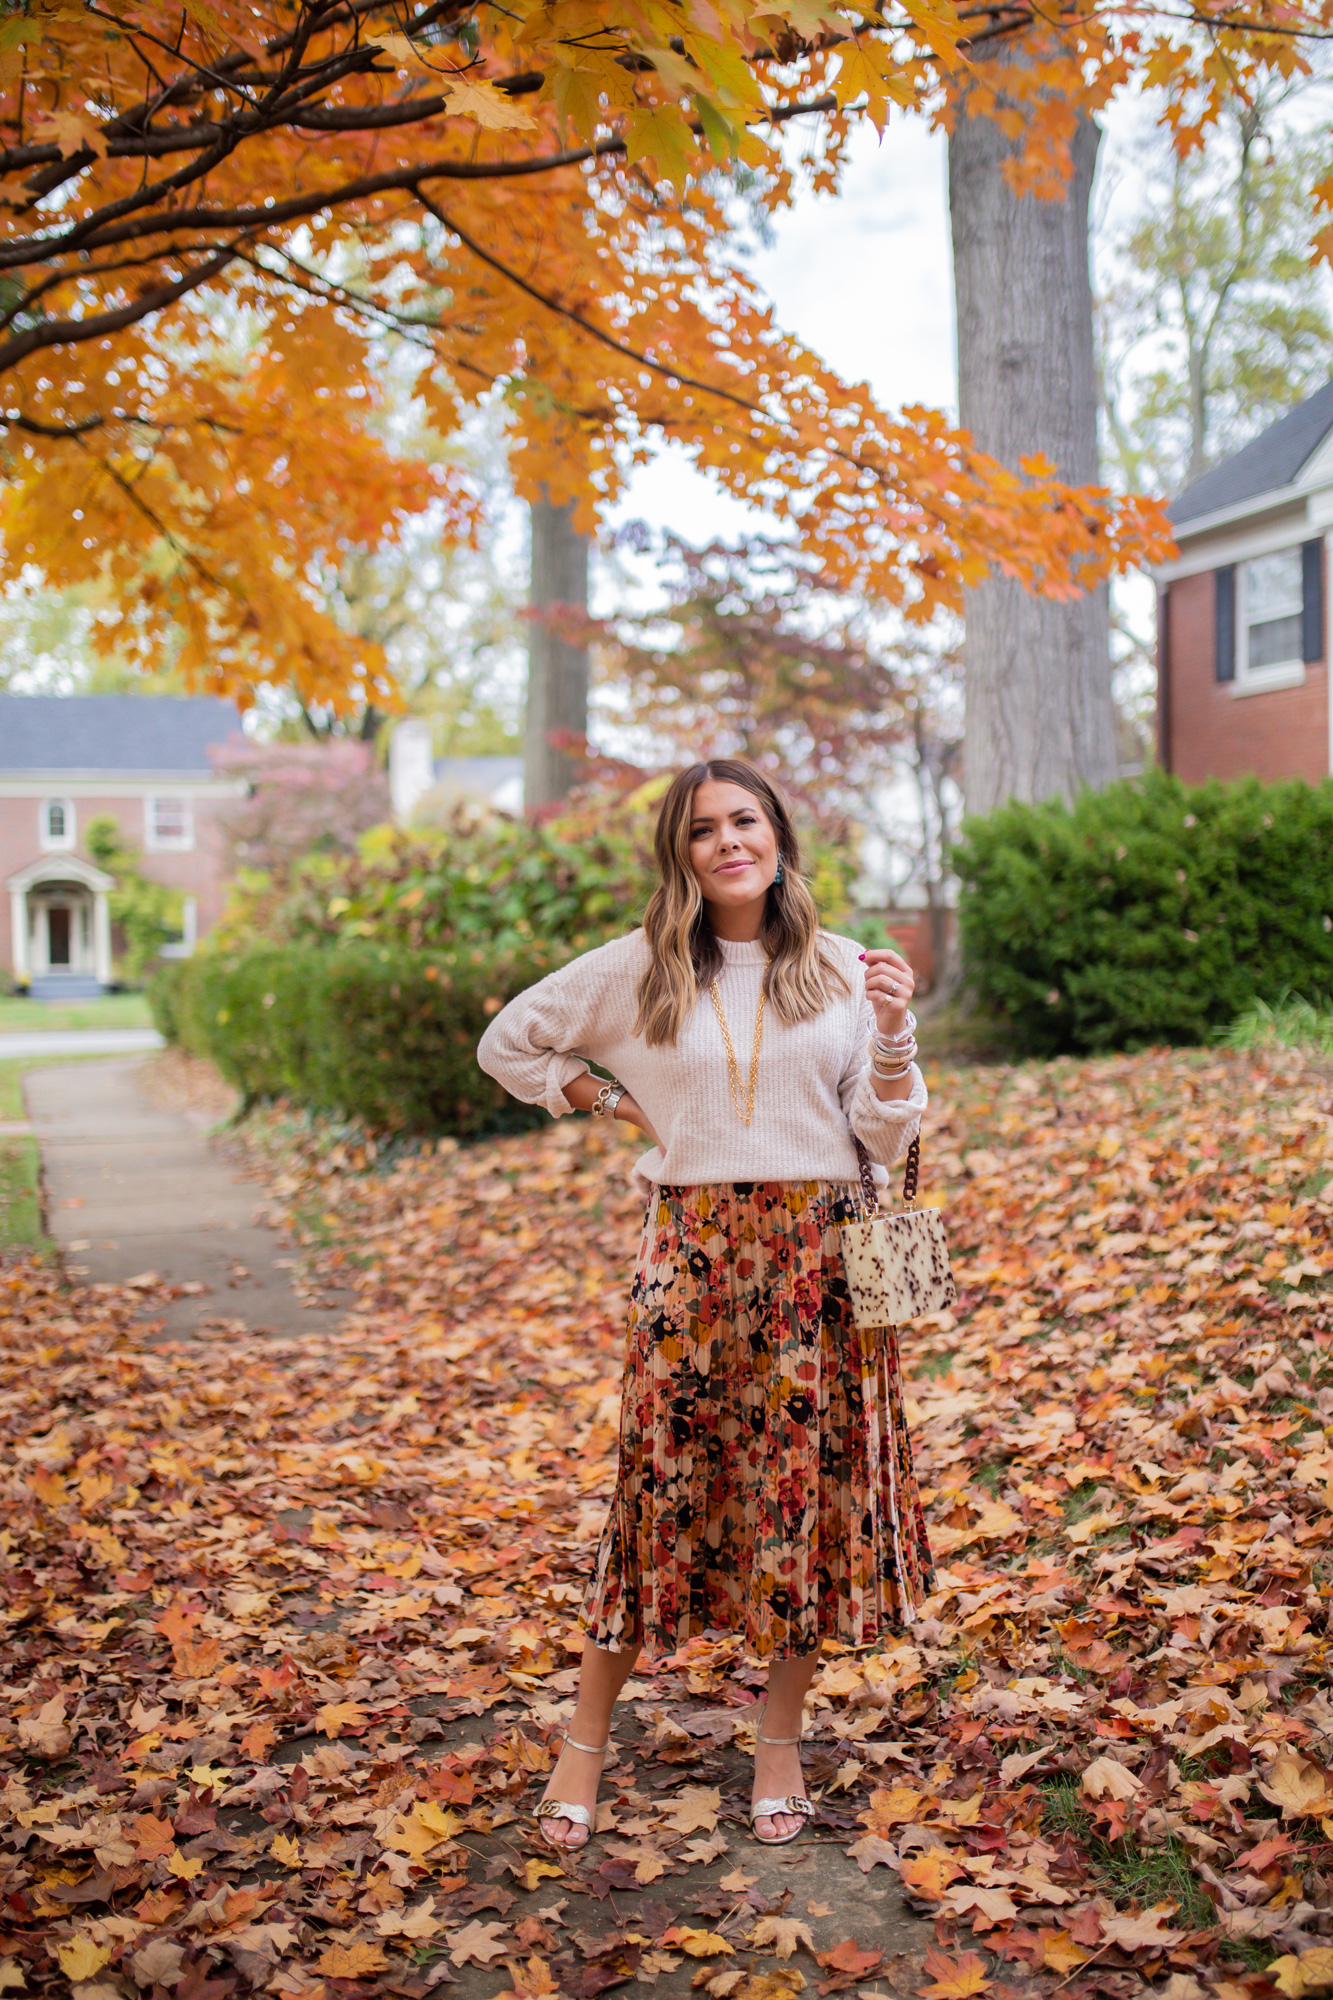 6 Foolproof Ways to Style a Skirt This Fall